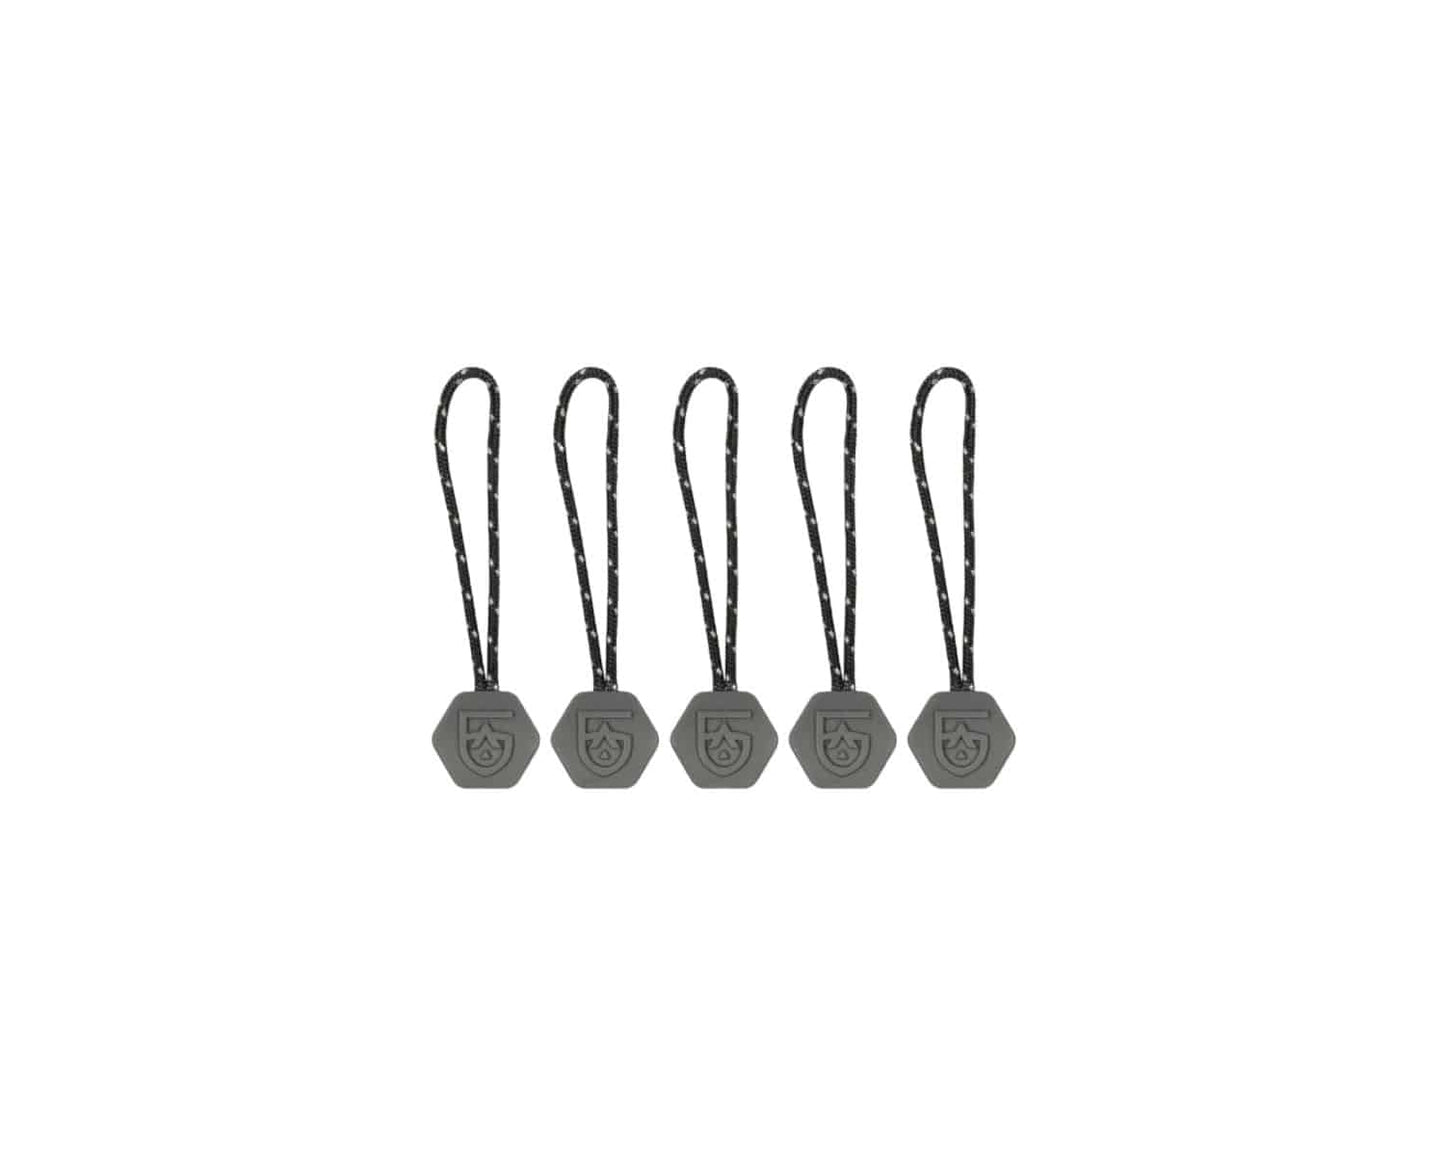 Gear Aid Replacement Zipper Pulls – Pack of 5 Gear Aid